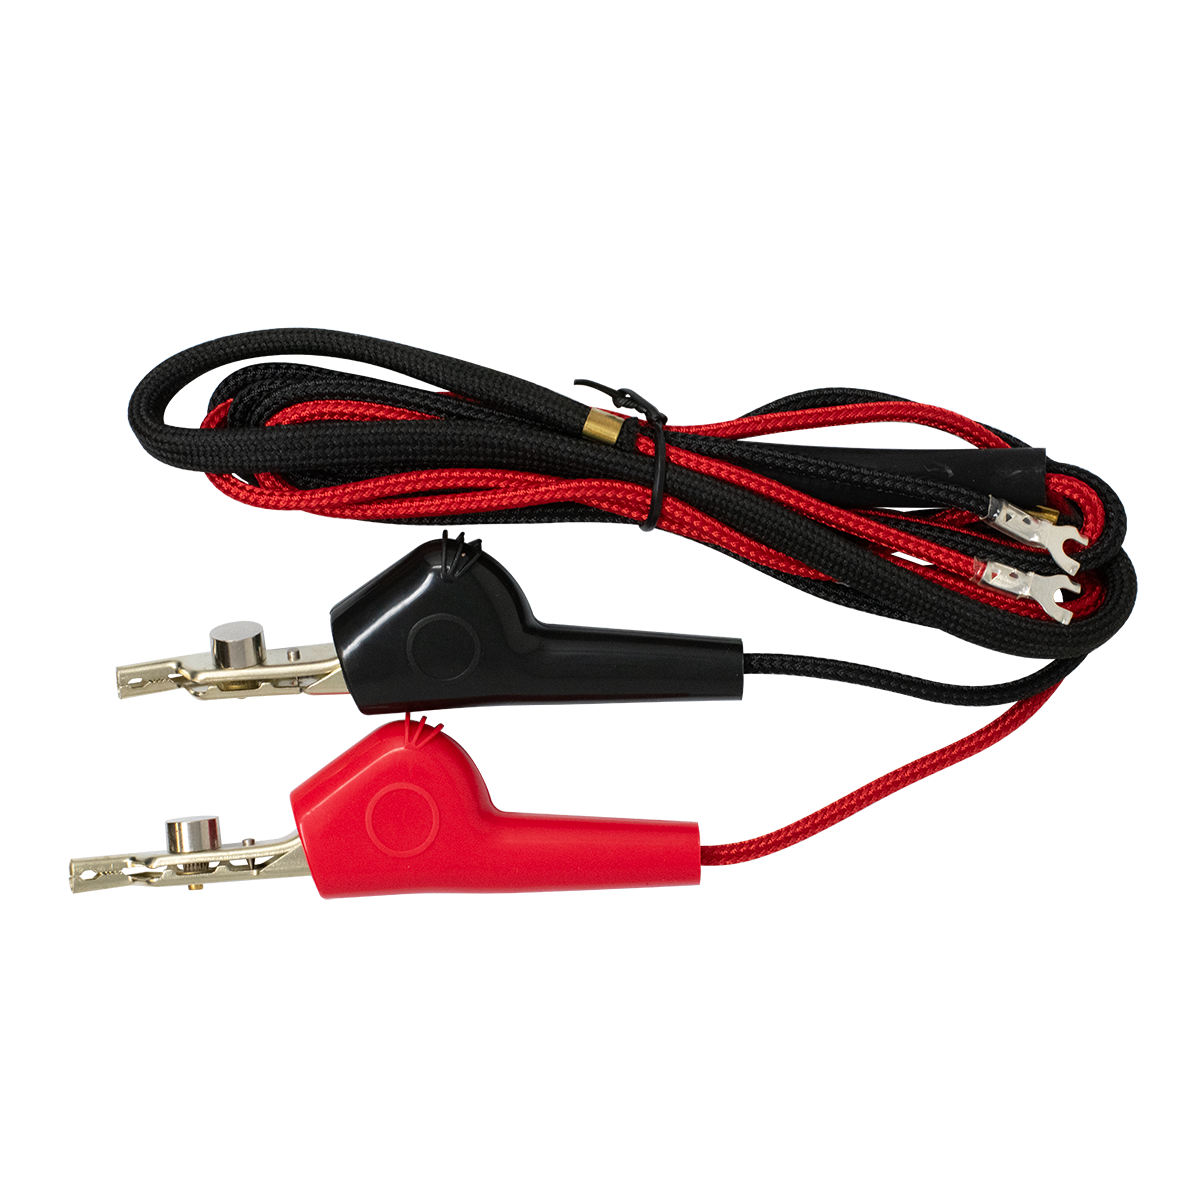 BUTTSET REPLACEMENT CORDS, RED/BLACK, SPADE ENDS